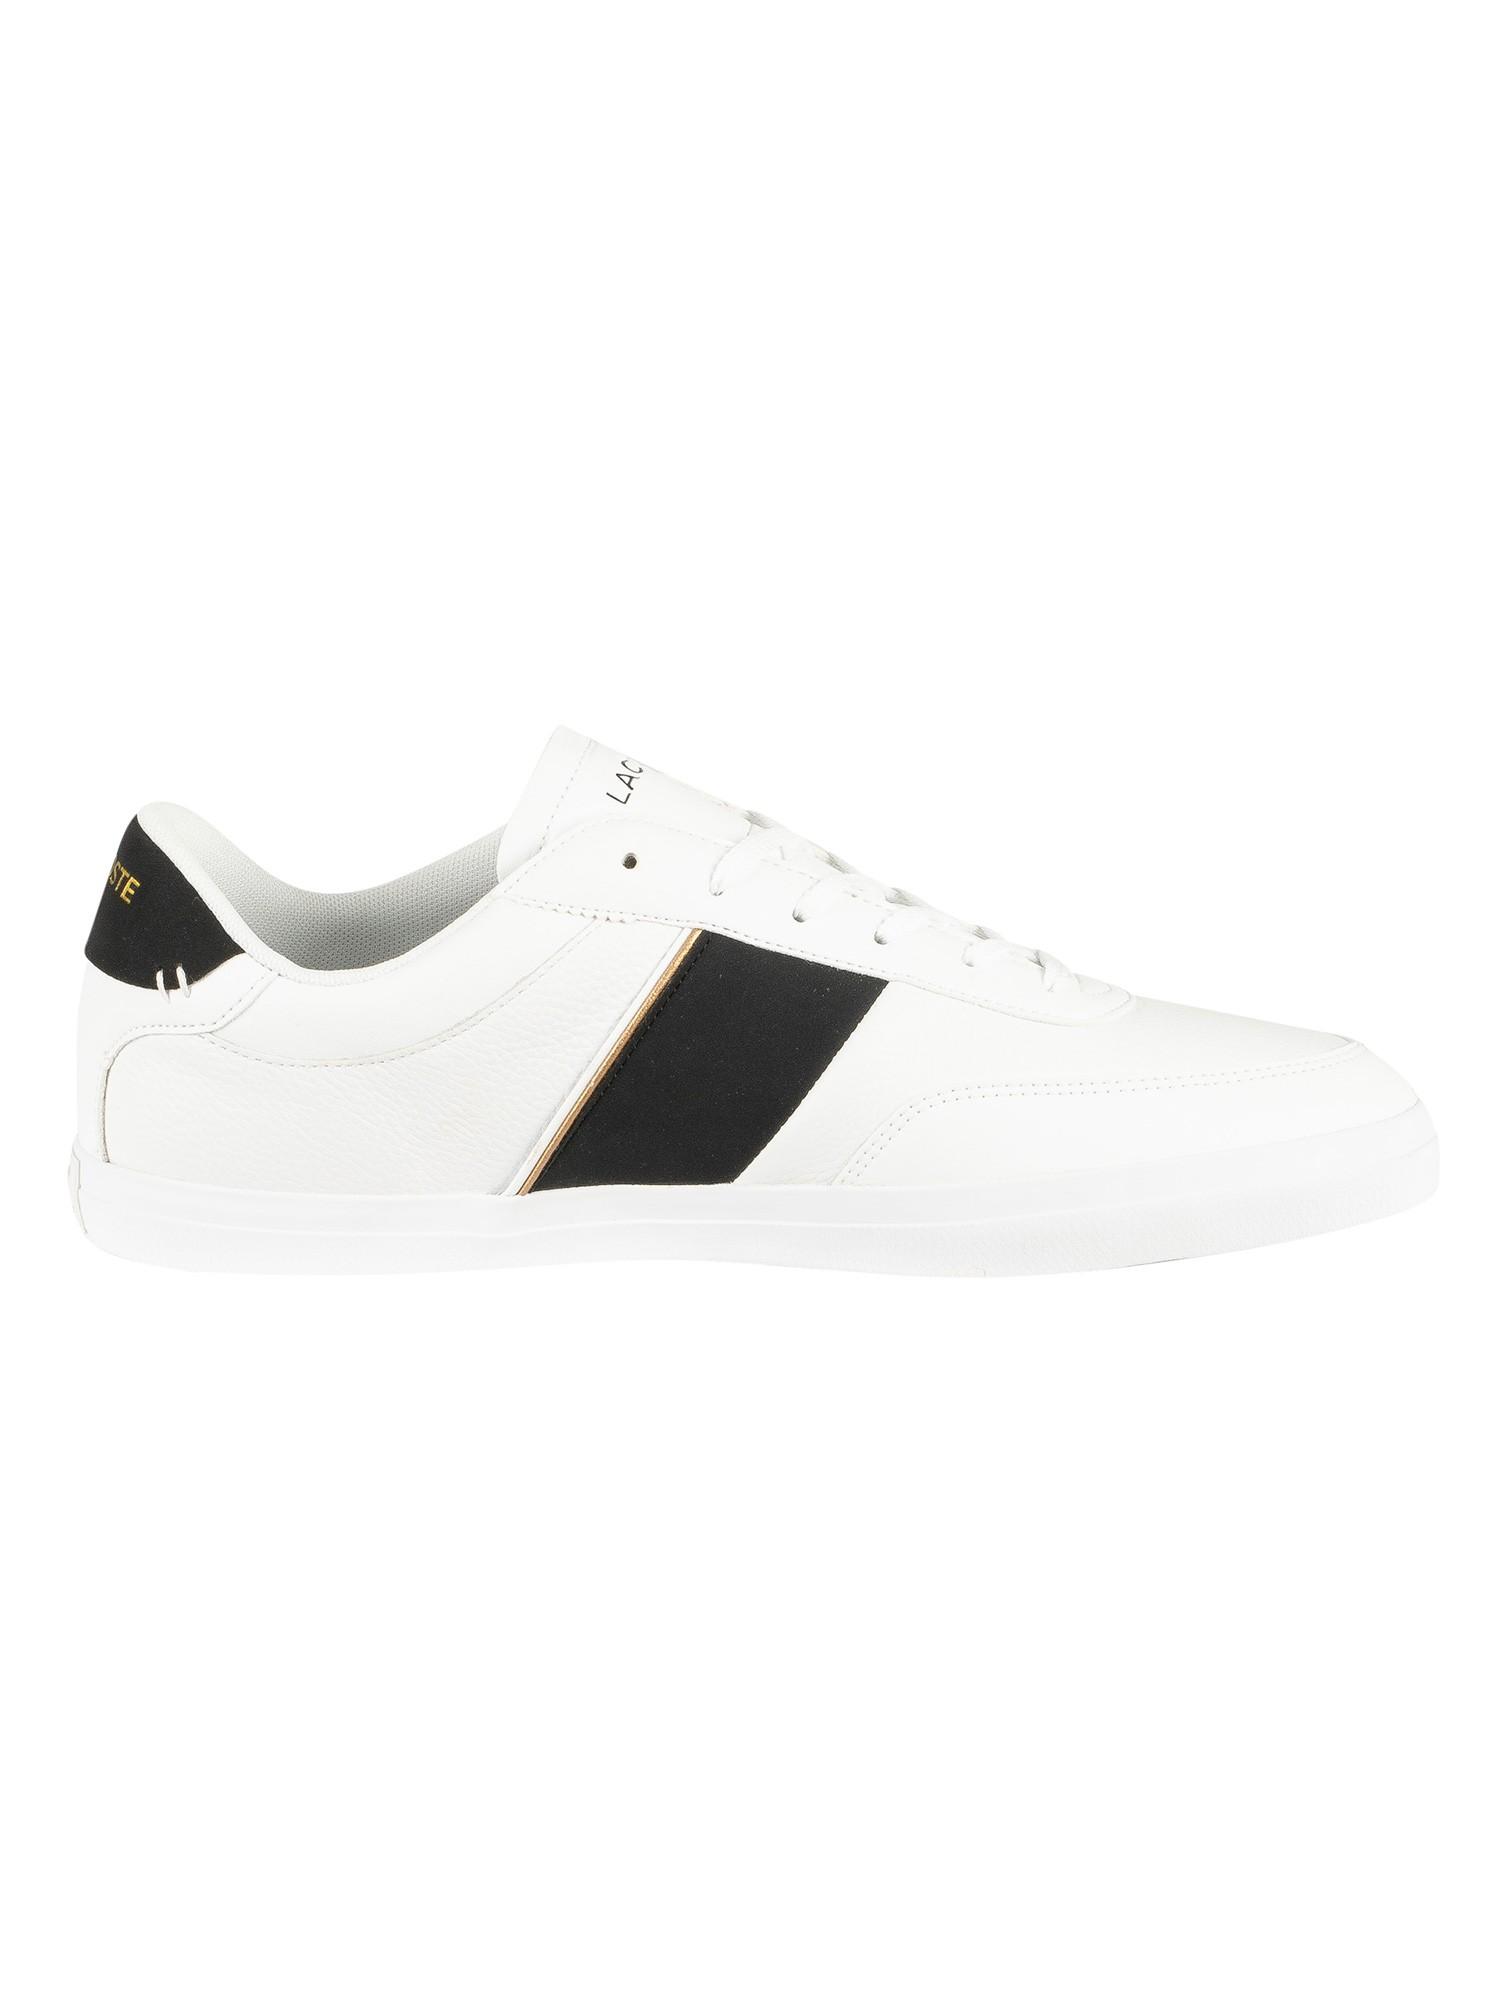 scotts lacoste trainers sale - 56% OFF 